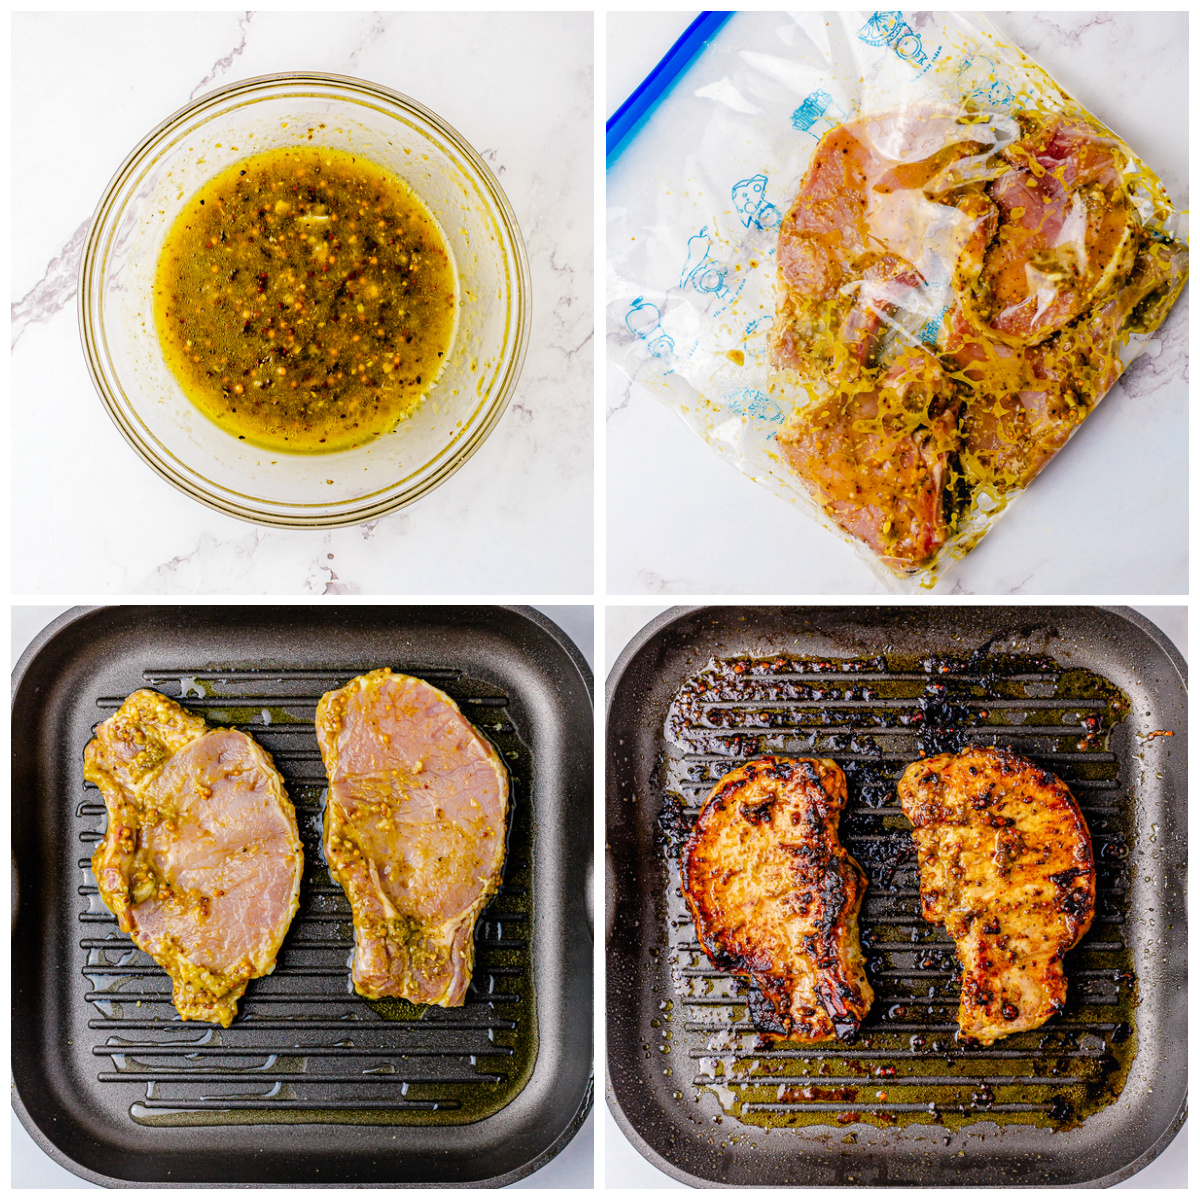 Step by step photos on how to make a Grilled Pork Chop marinade